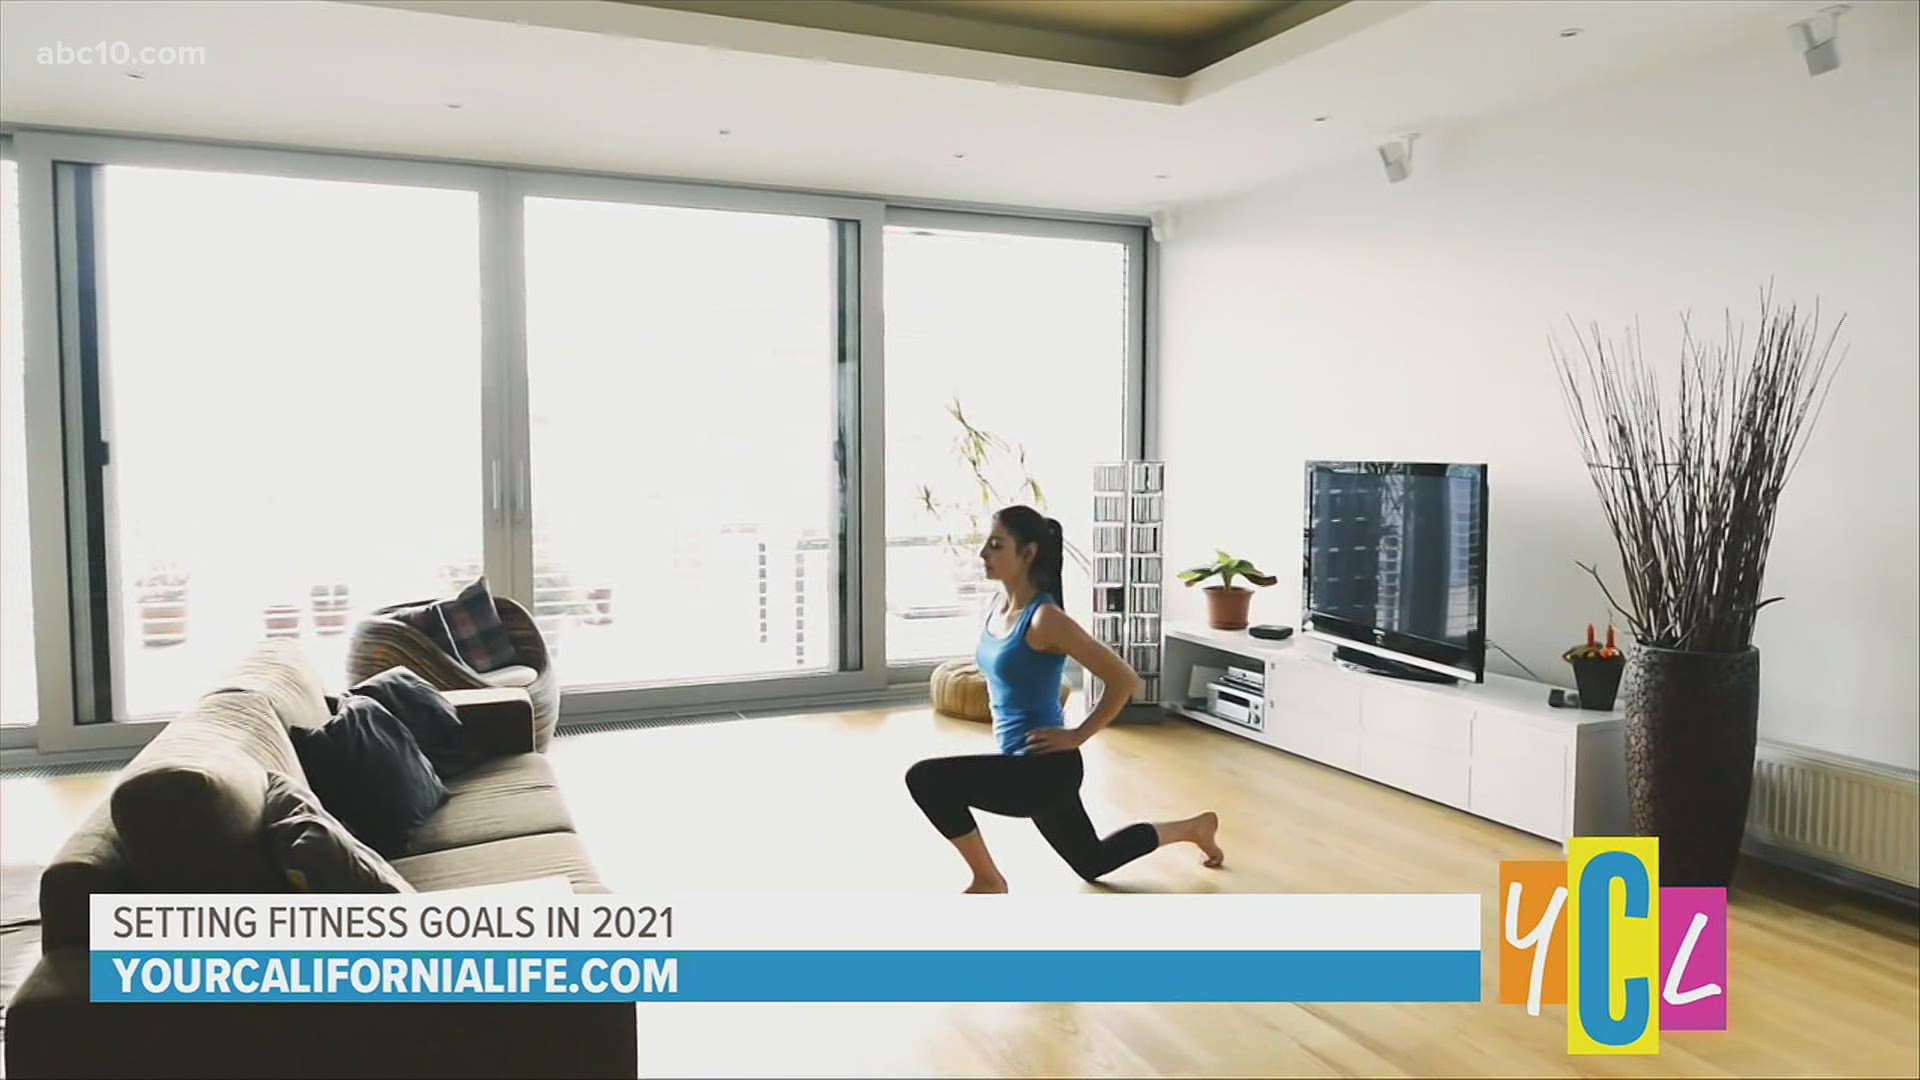 Certified Holistic Transformation Coach Adriana Gentile talks health and wellness, plus how to personalize fitness goals and stick with them the entire year.